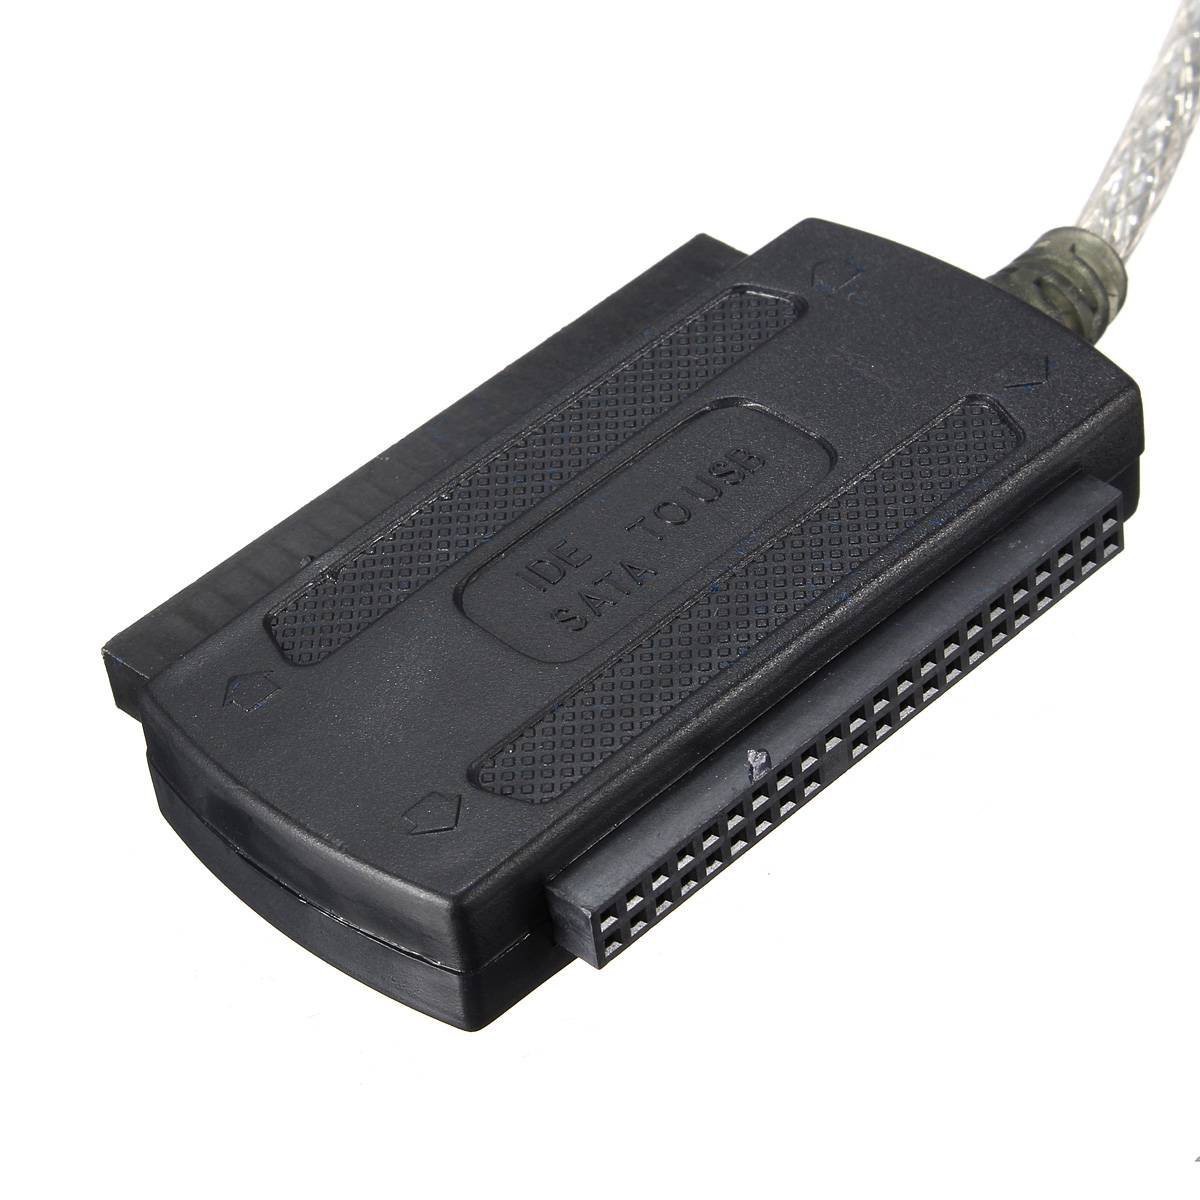 Ready Stock USB 2.0 Male to IDE SATA 2.5 "3.5" Converter Adapter Cable Hard Drive M7VN